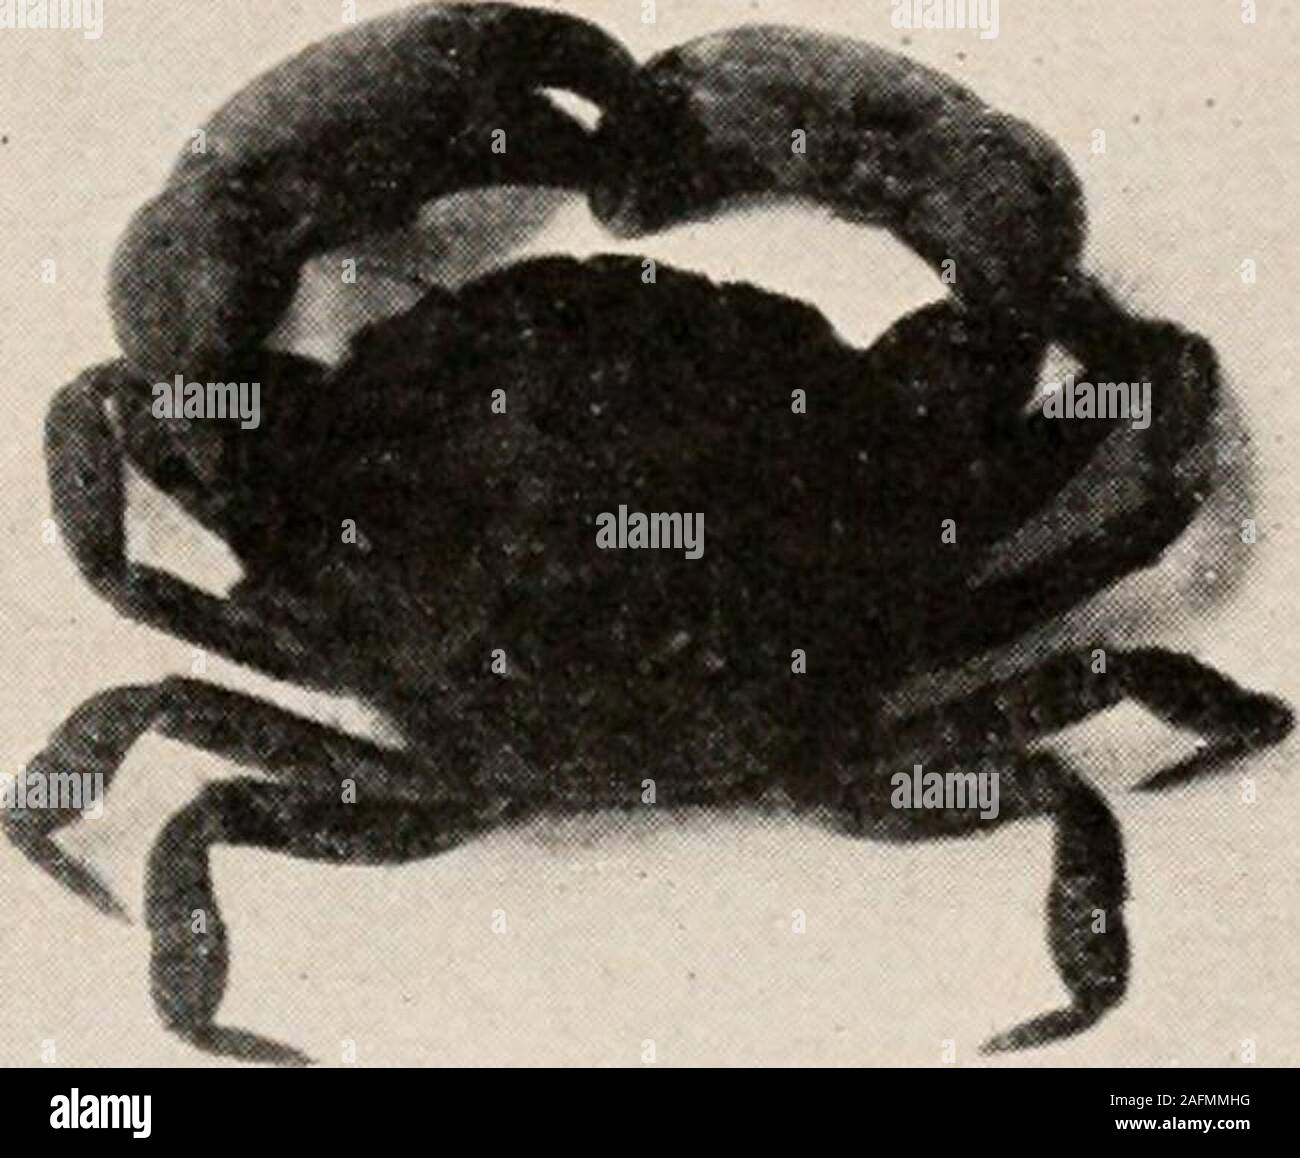 . Introduction to zoology; a guide to the study of animals, for the use of secondary schools;. largest of all the Crustacea, someindividuals measuring, from tip to tip of the first pair oflegs, 18 to 20 feet. The edible crab is a typical arched crab. It is so calledbecause the carapace is arched in front. The carapace isalso broader than long, and narrower behind than in front. THE CRAYFISH AND ITS ALLIES 109 The legs of this family are short and broad, and in somespecies the posterior pair is especially broad - - an adapta-tion for swimming. These crabsmay be divided into two groups— the burr Stock Photo